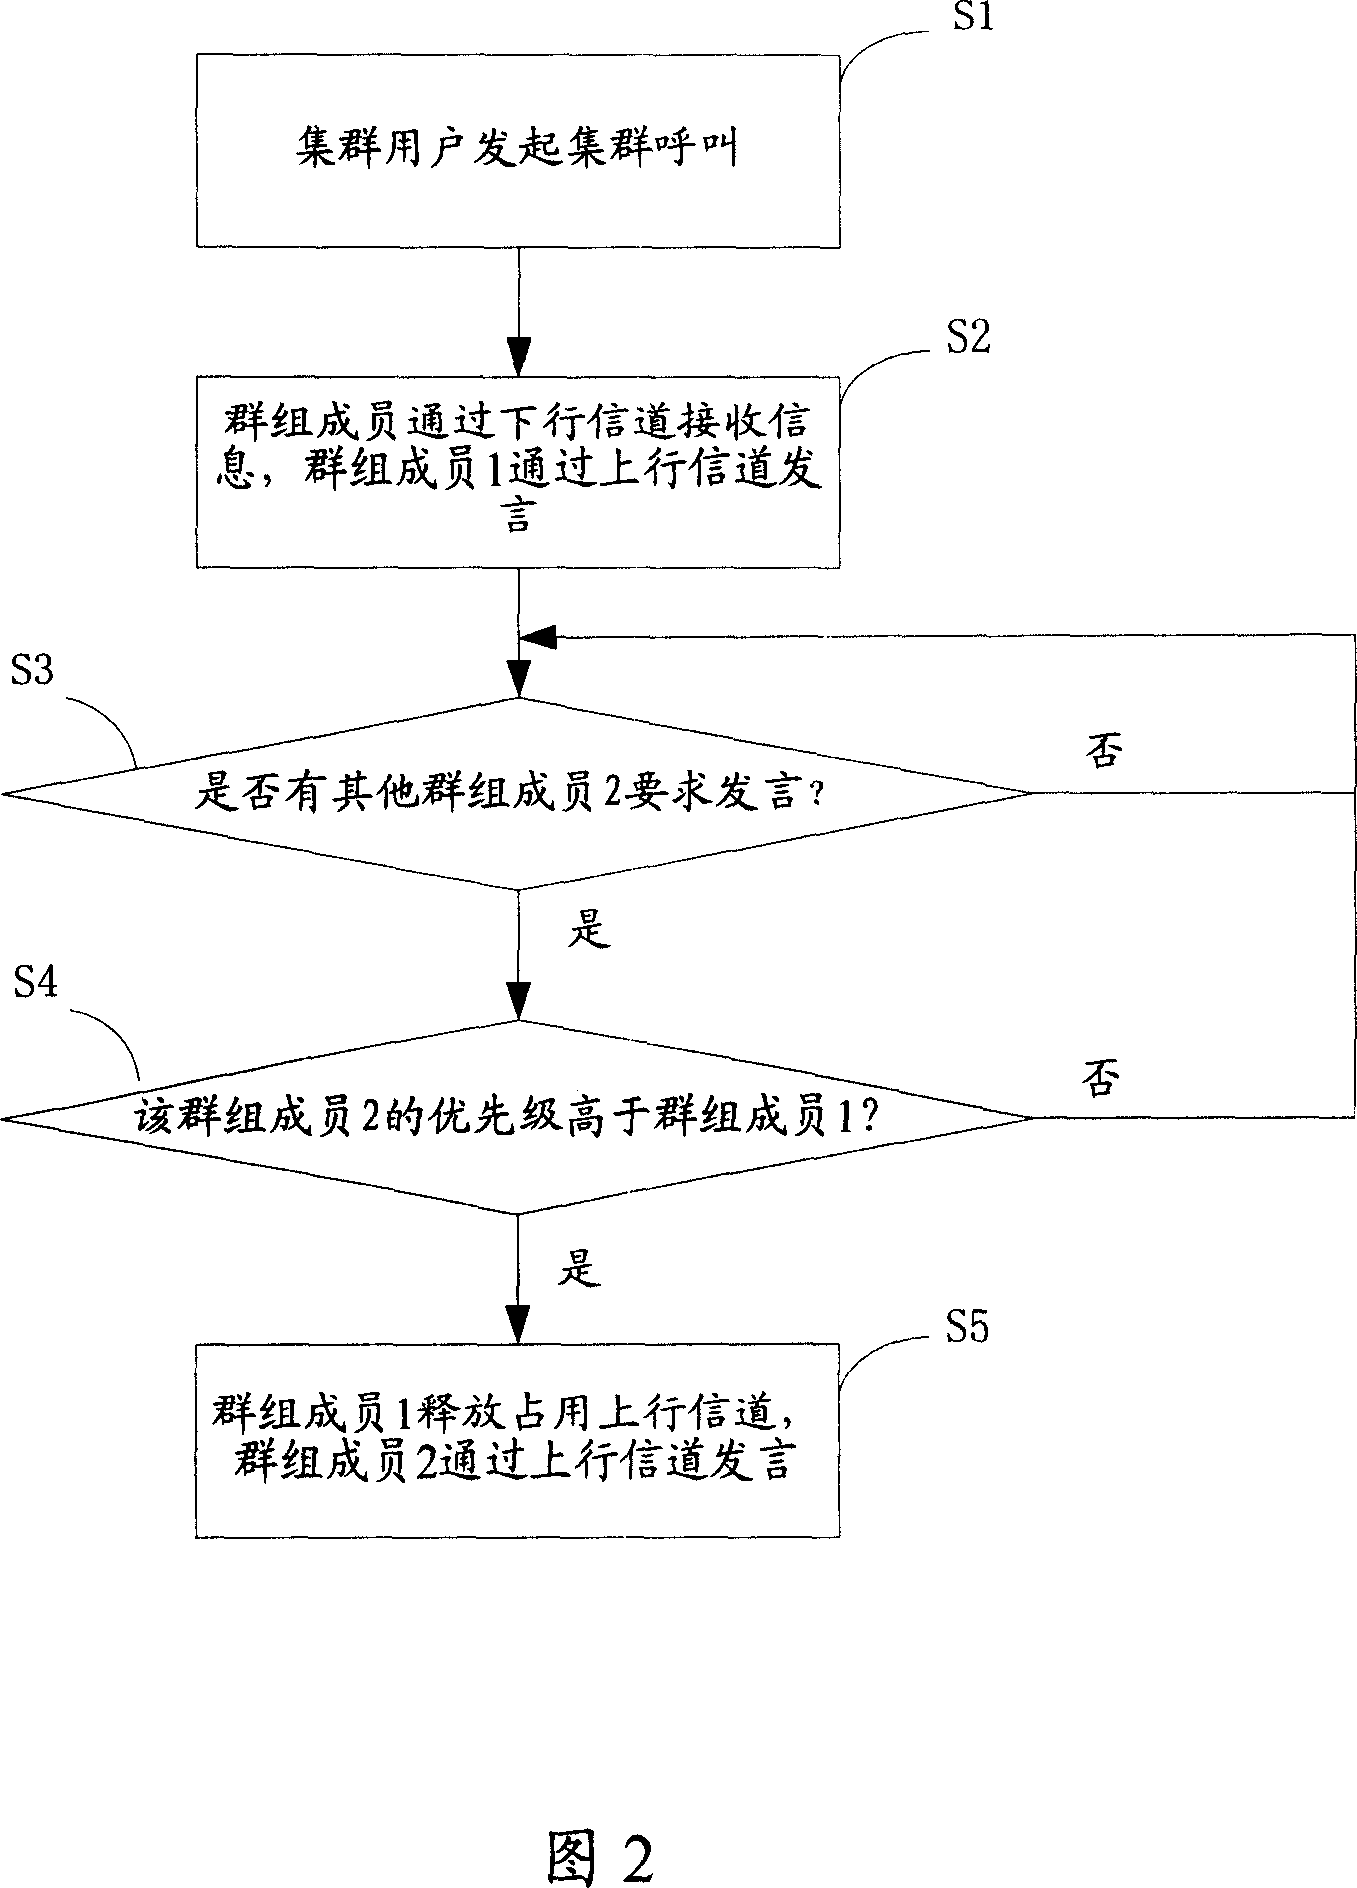 Method for realizing colony communication calling business